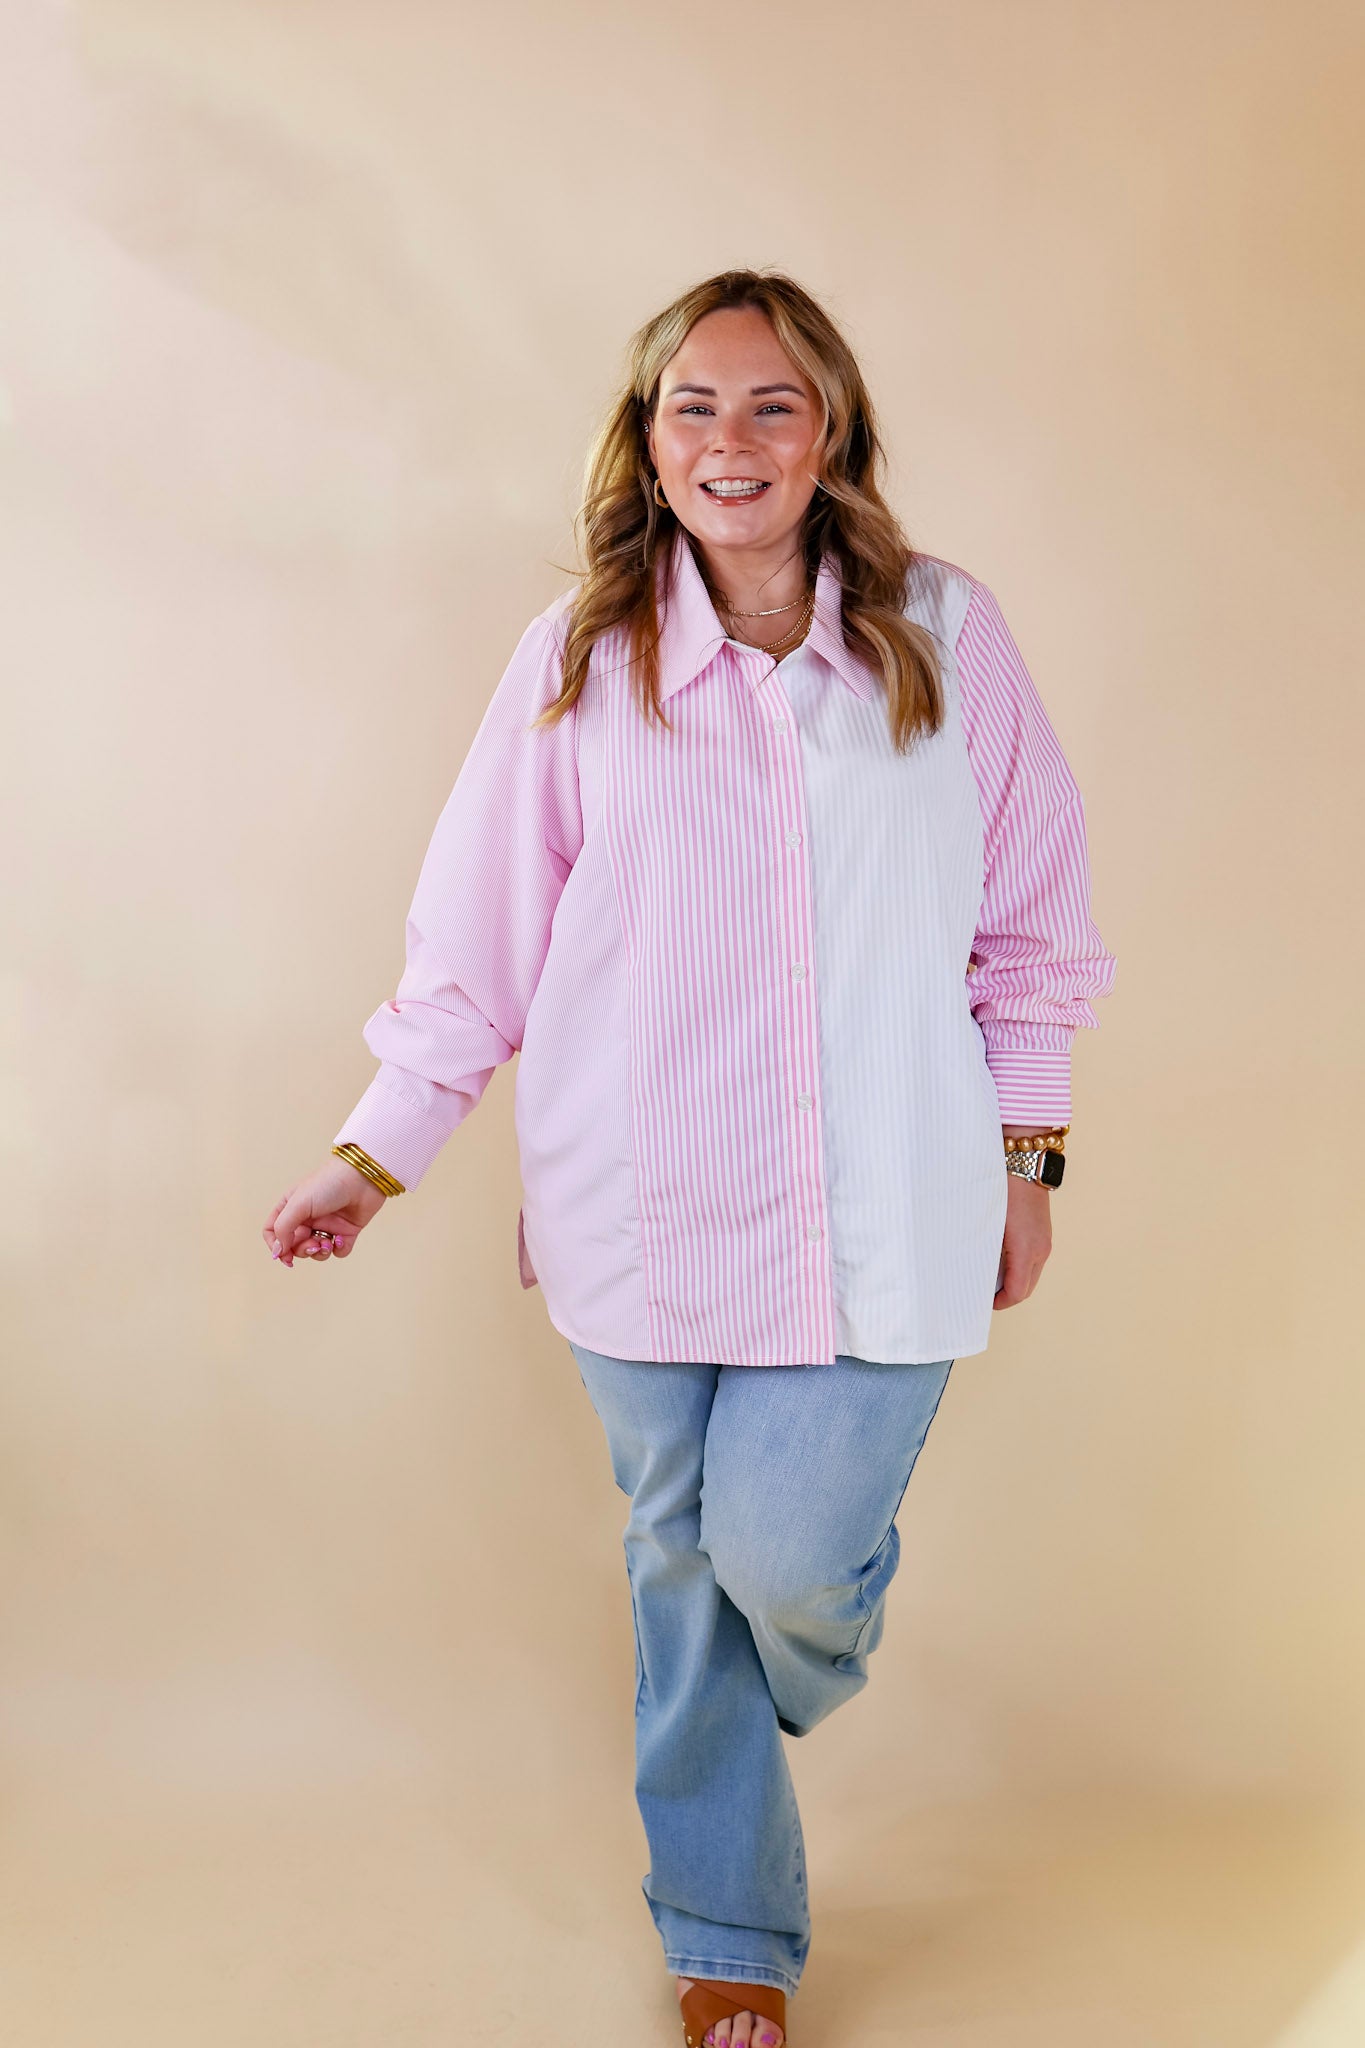 Back To You Pin Stripe Color Block Button Up Top in Pink and White - Giddy Up Glamour Boutique